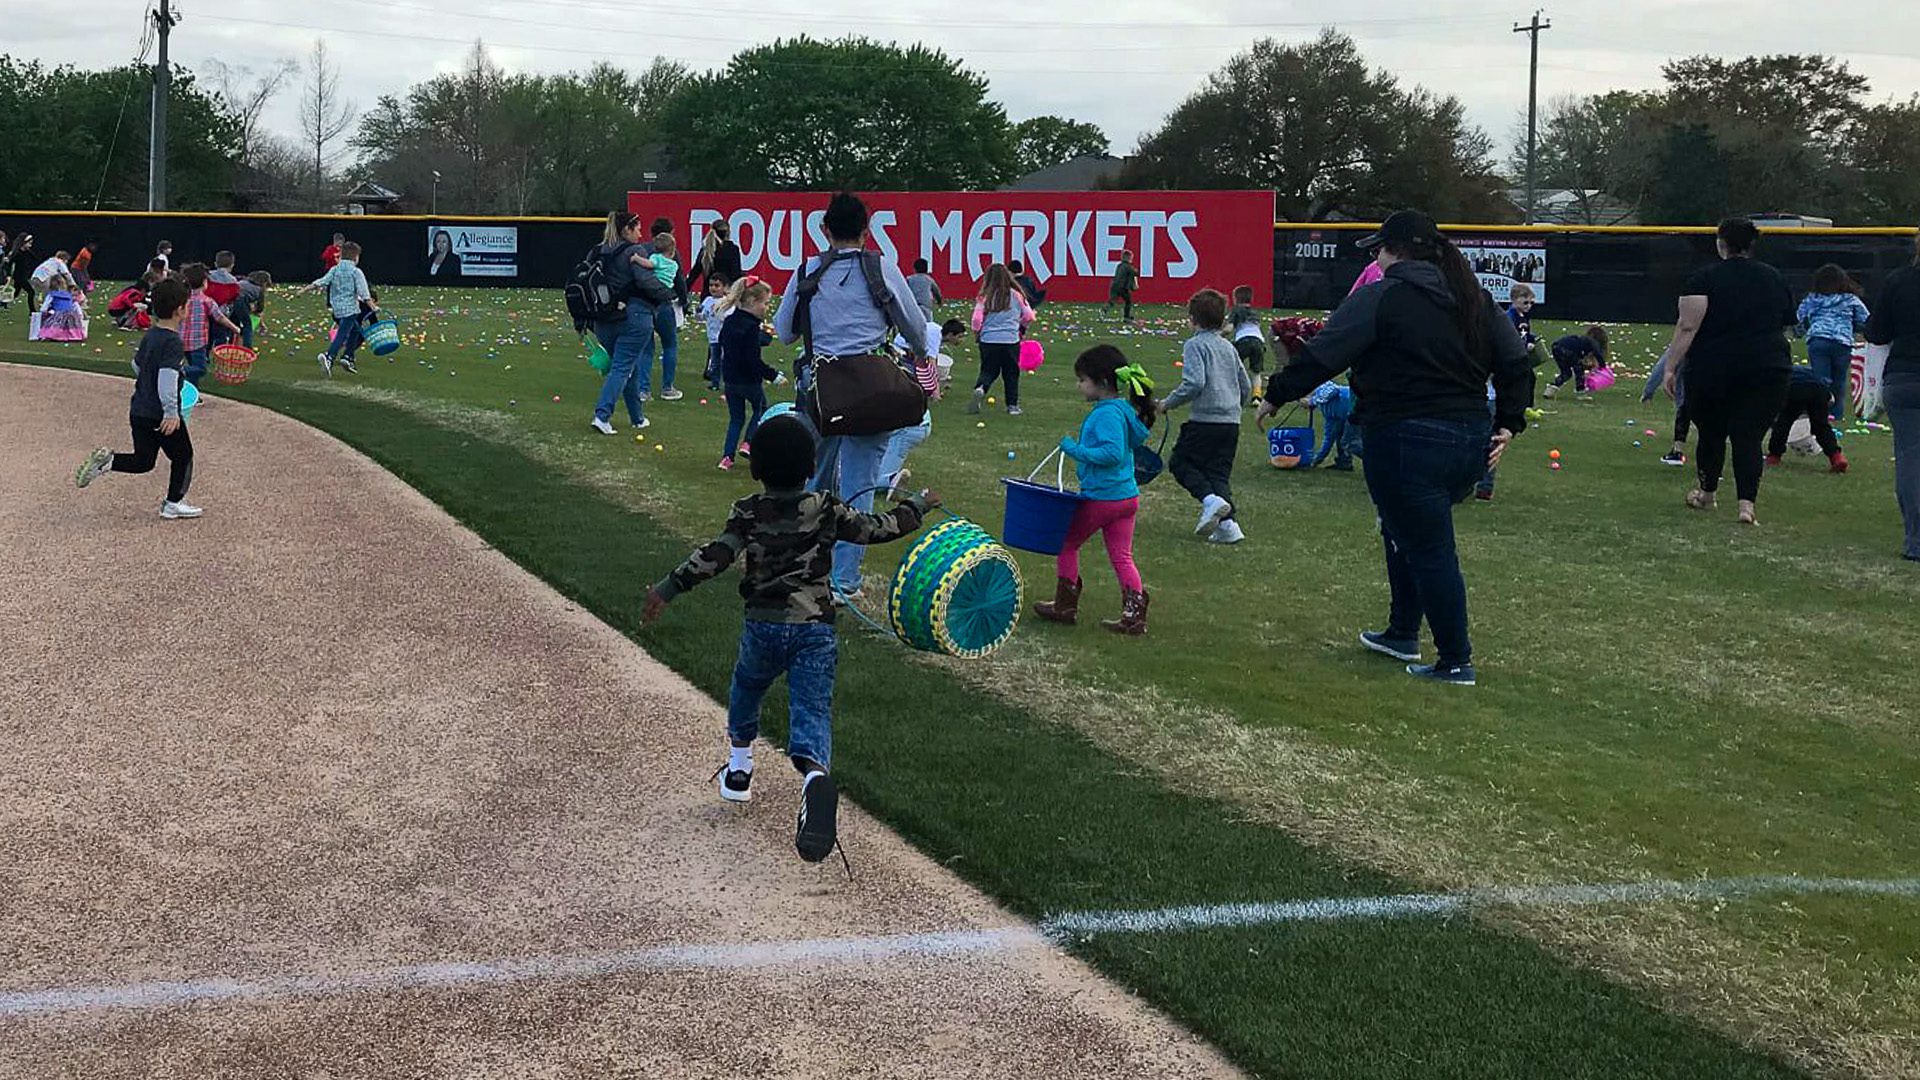 CHILDREN SEARCHING FOR EGGS AT HUNT 2021